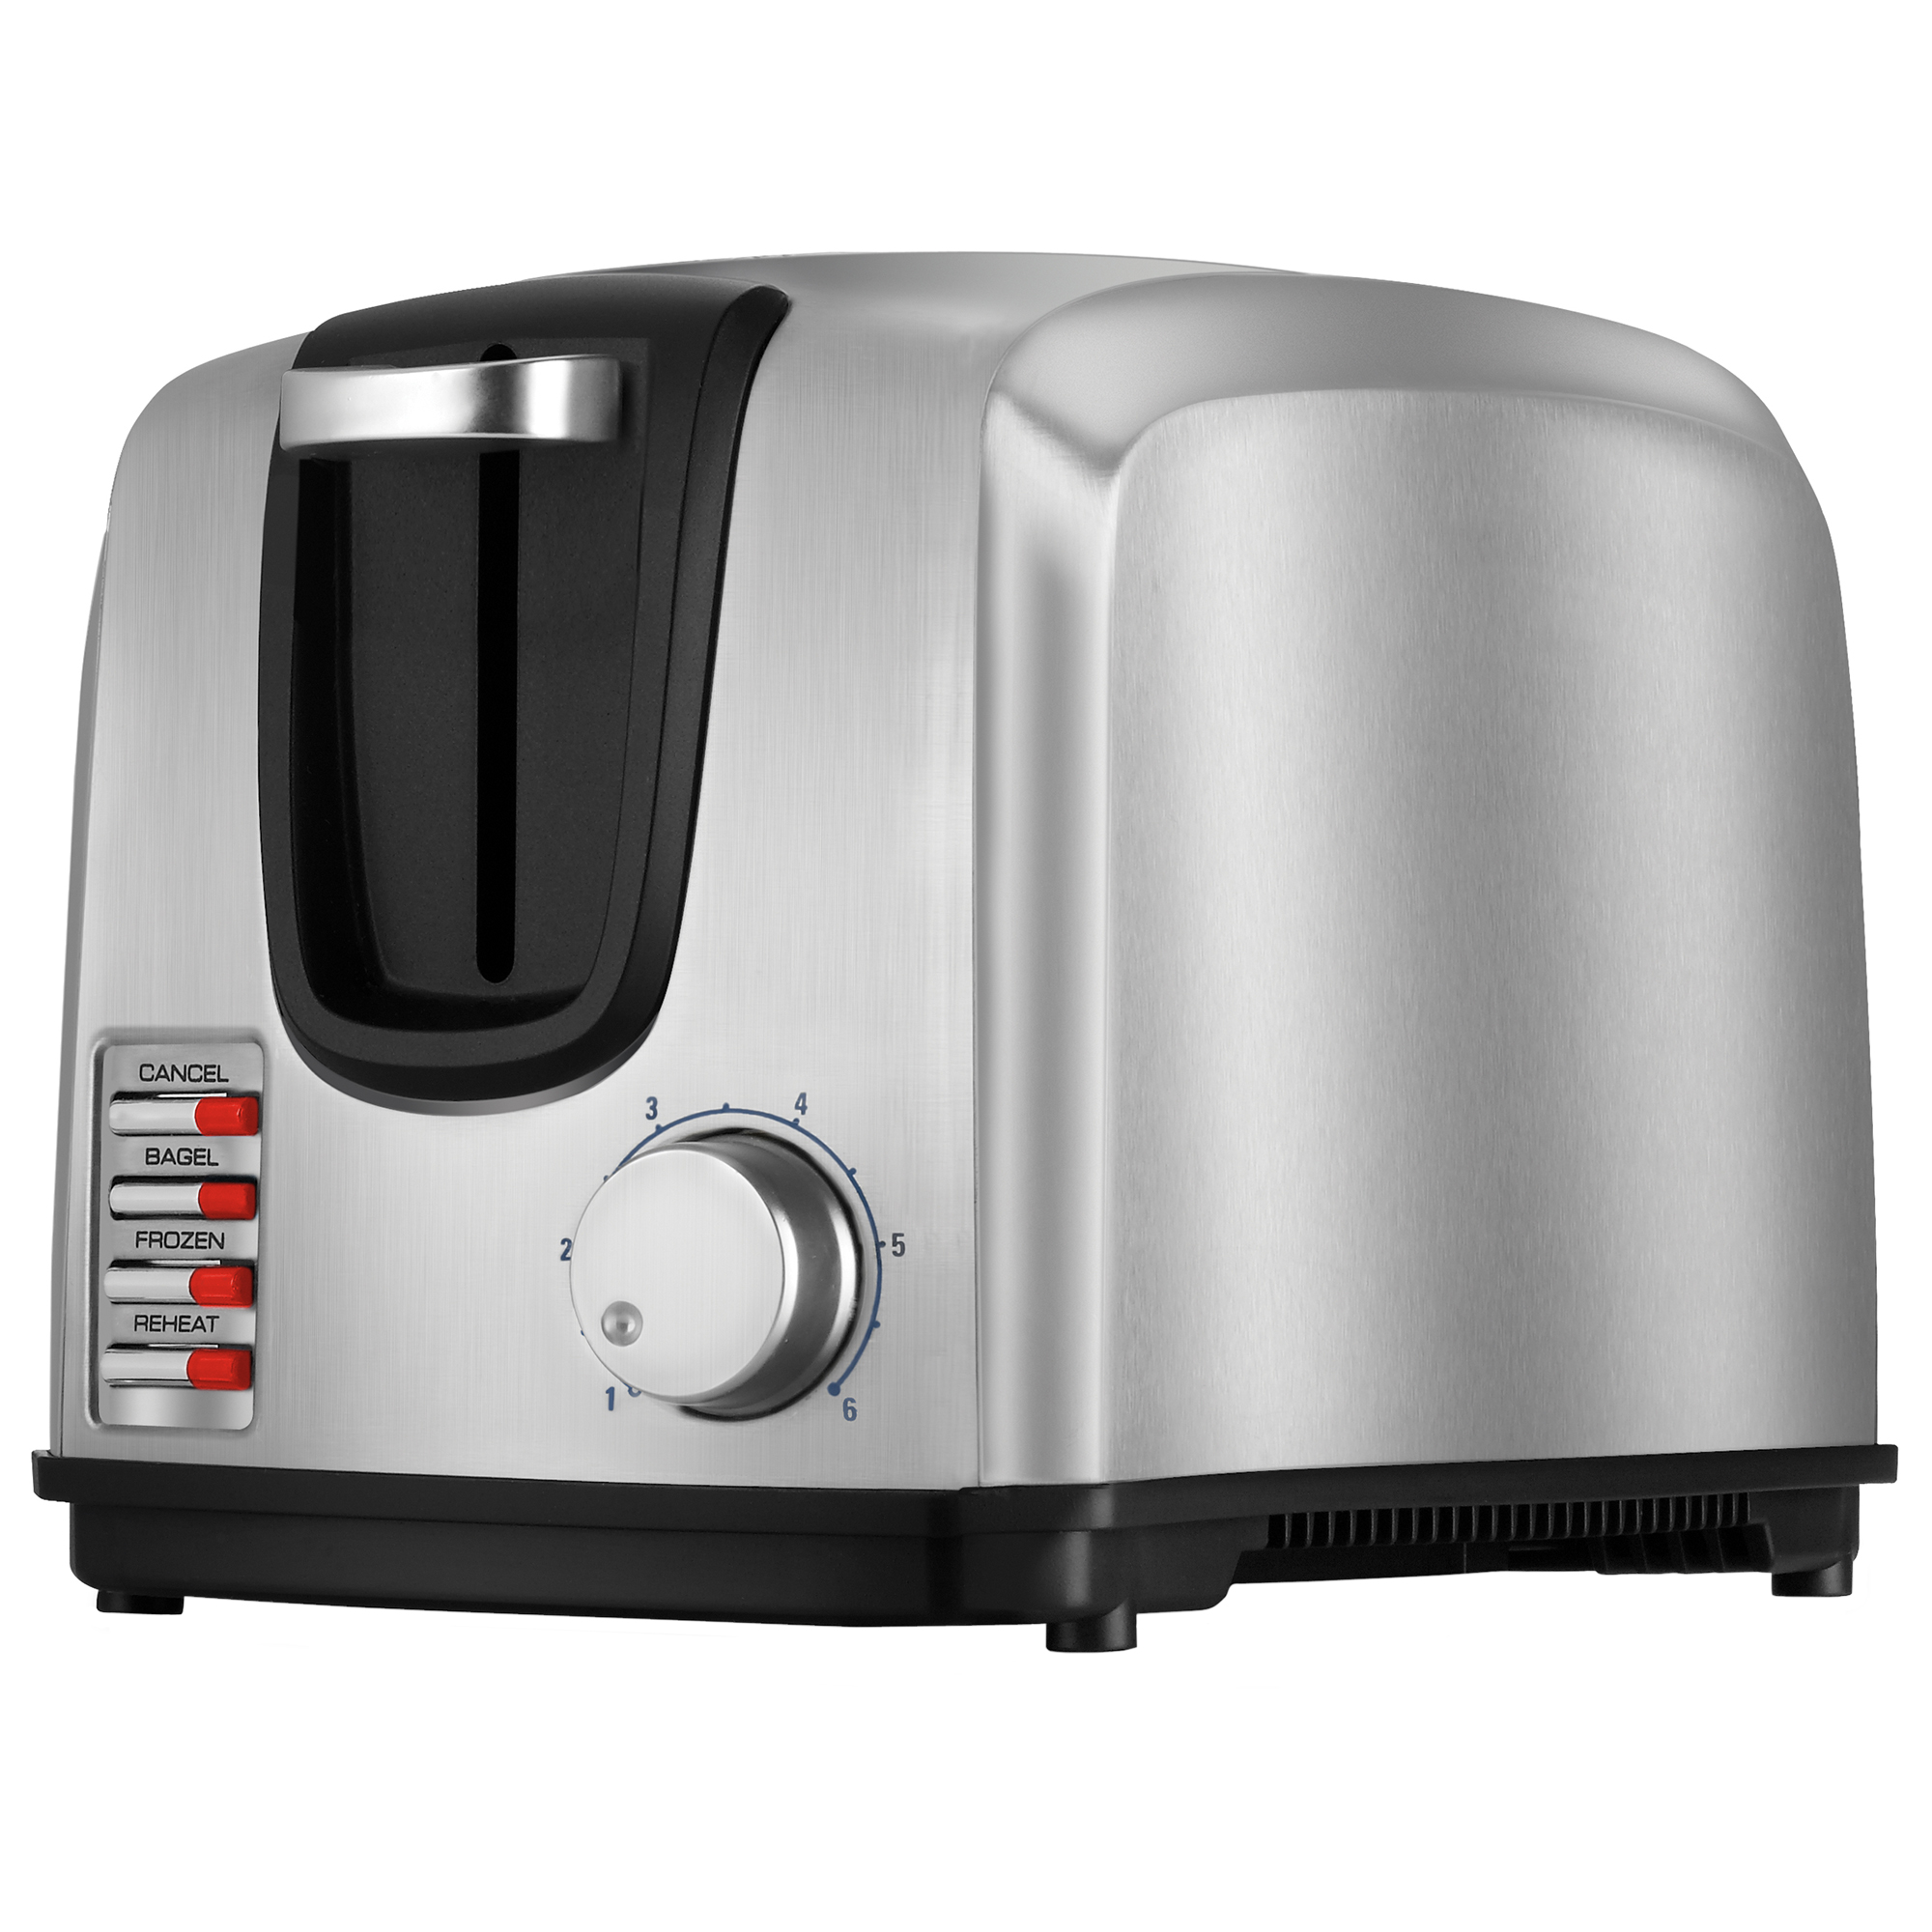 BLACK+DECKER 2-Slice Toaster with Extra-wide Slots, Stainless Steel, T2707S - image 1 of 12